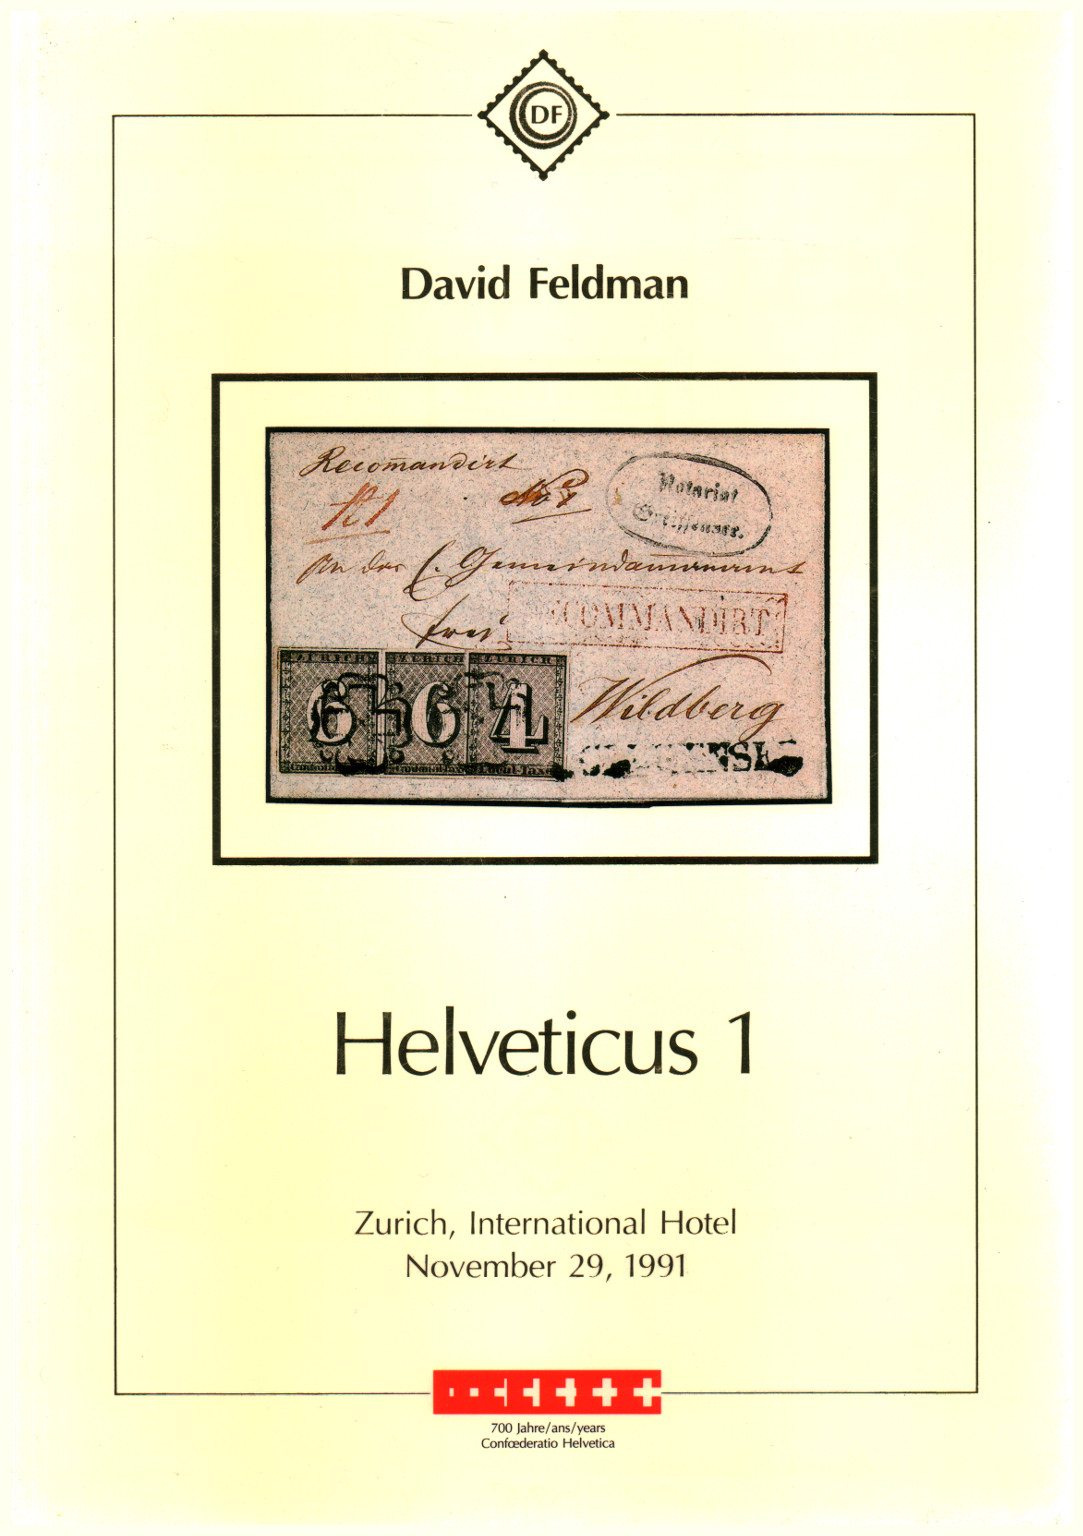 Helveticus 1, s.a.